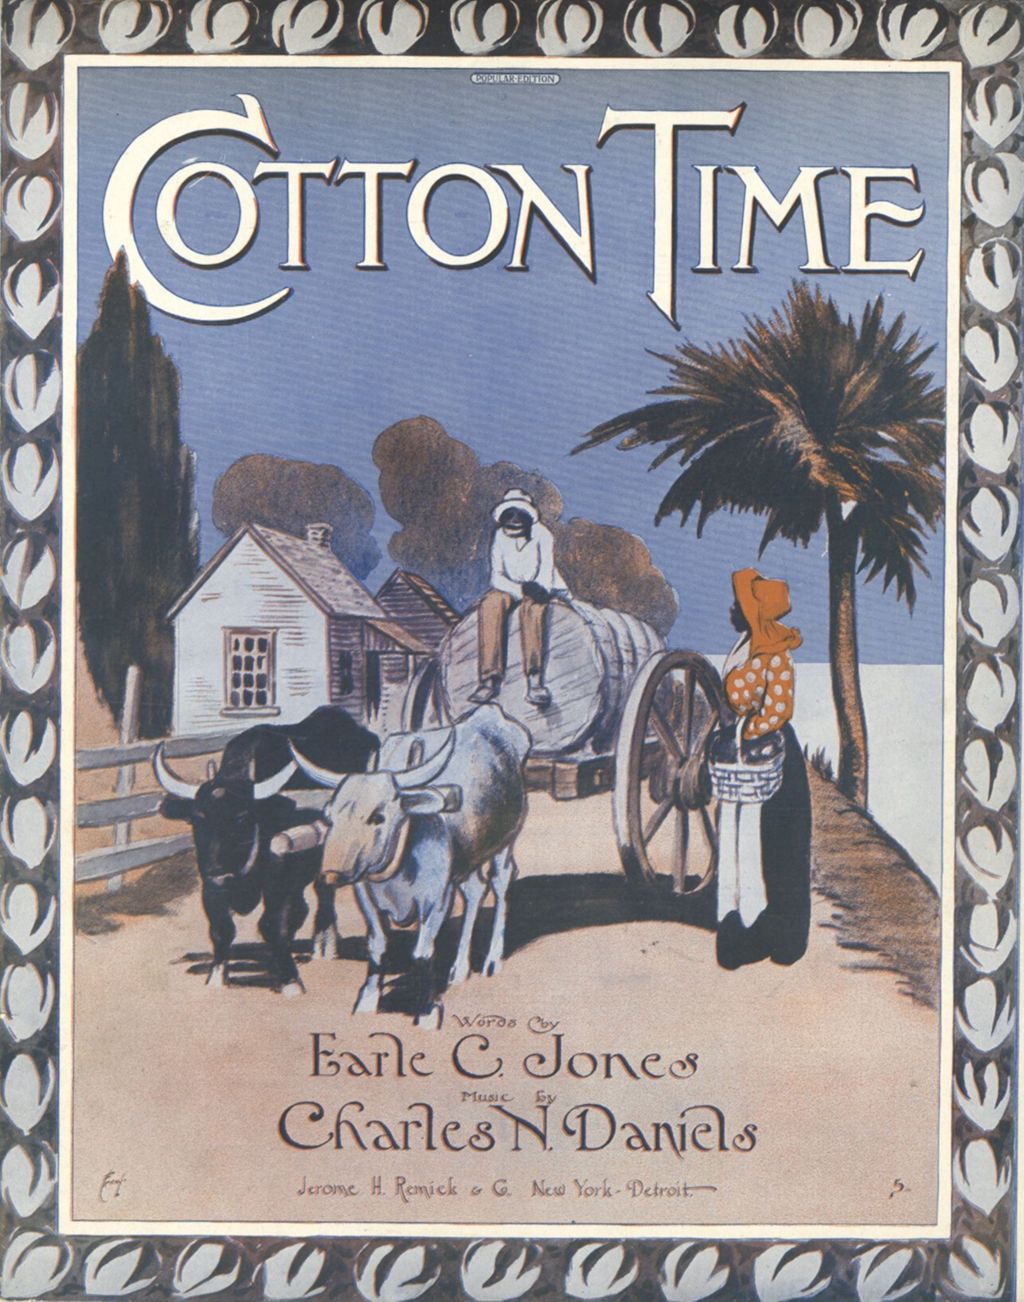 Miniature of Cotton Time